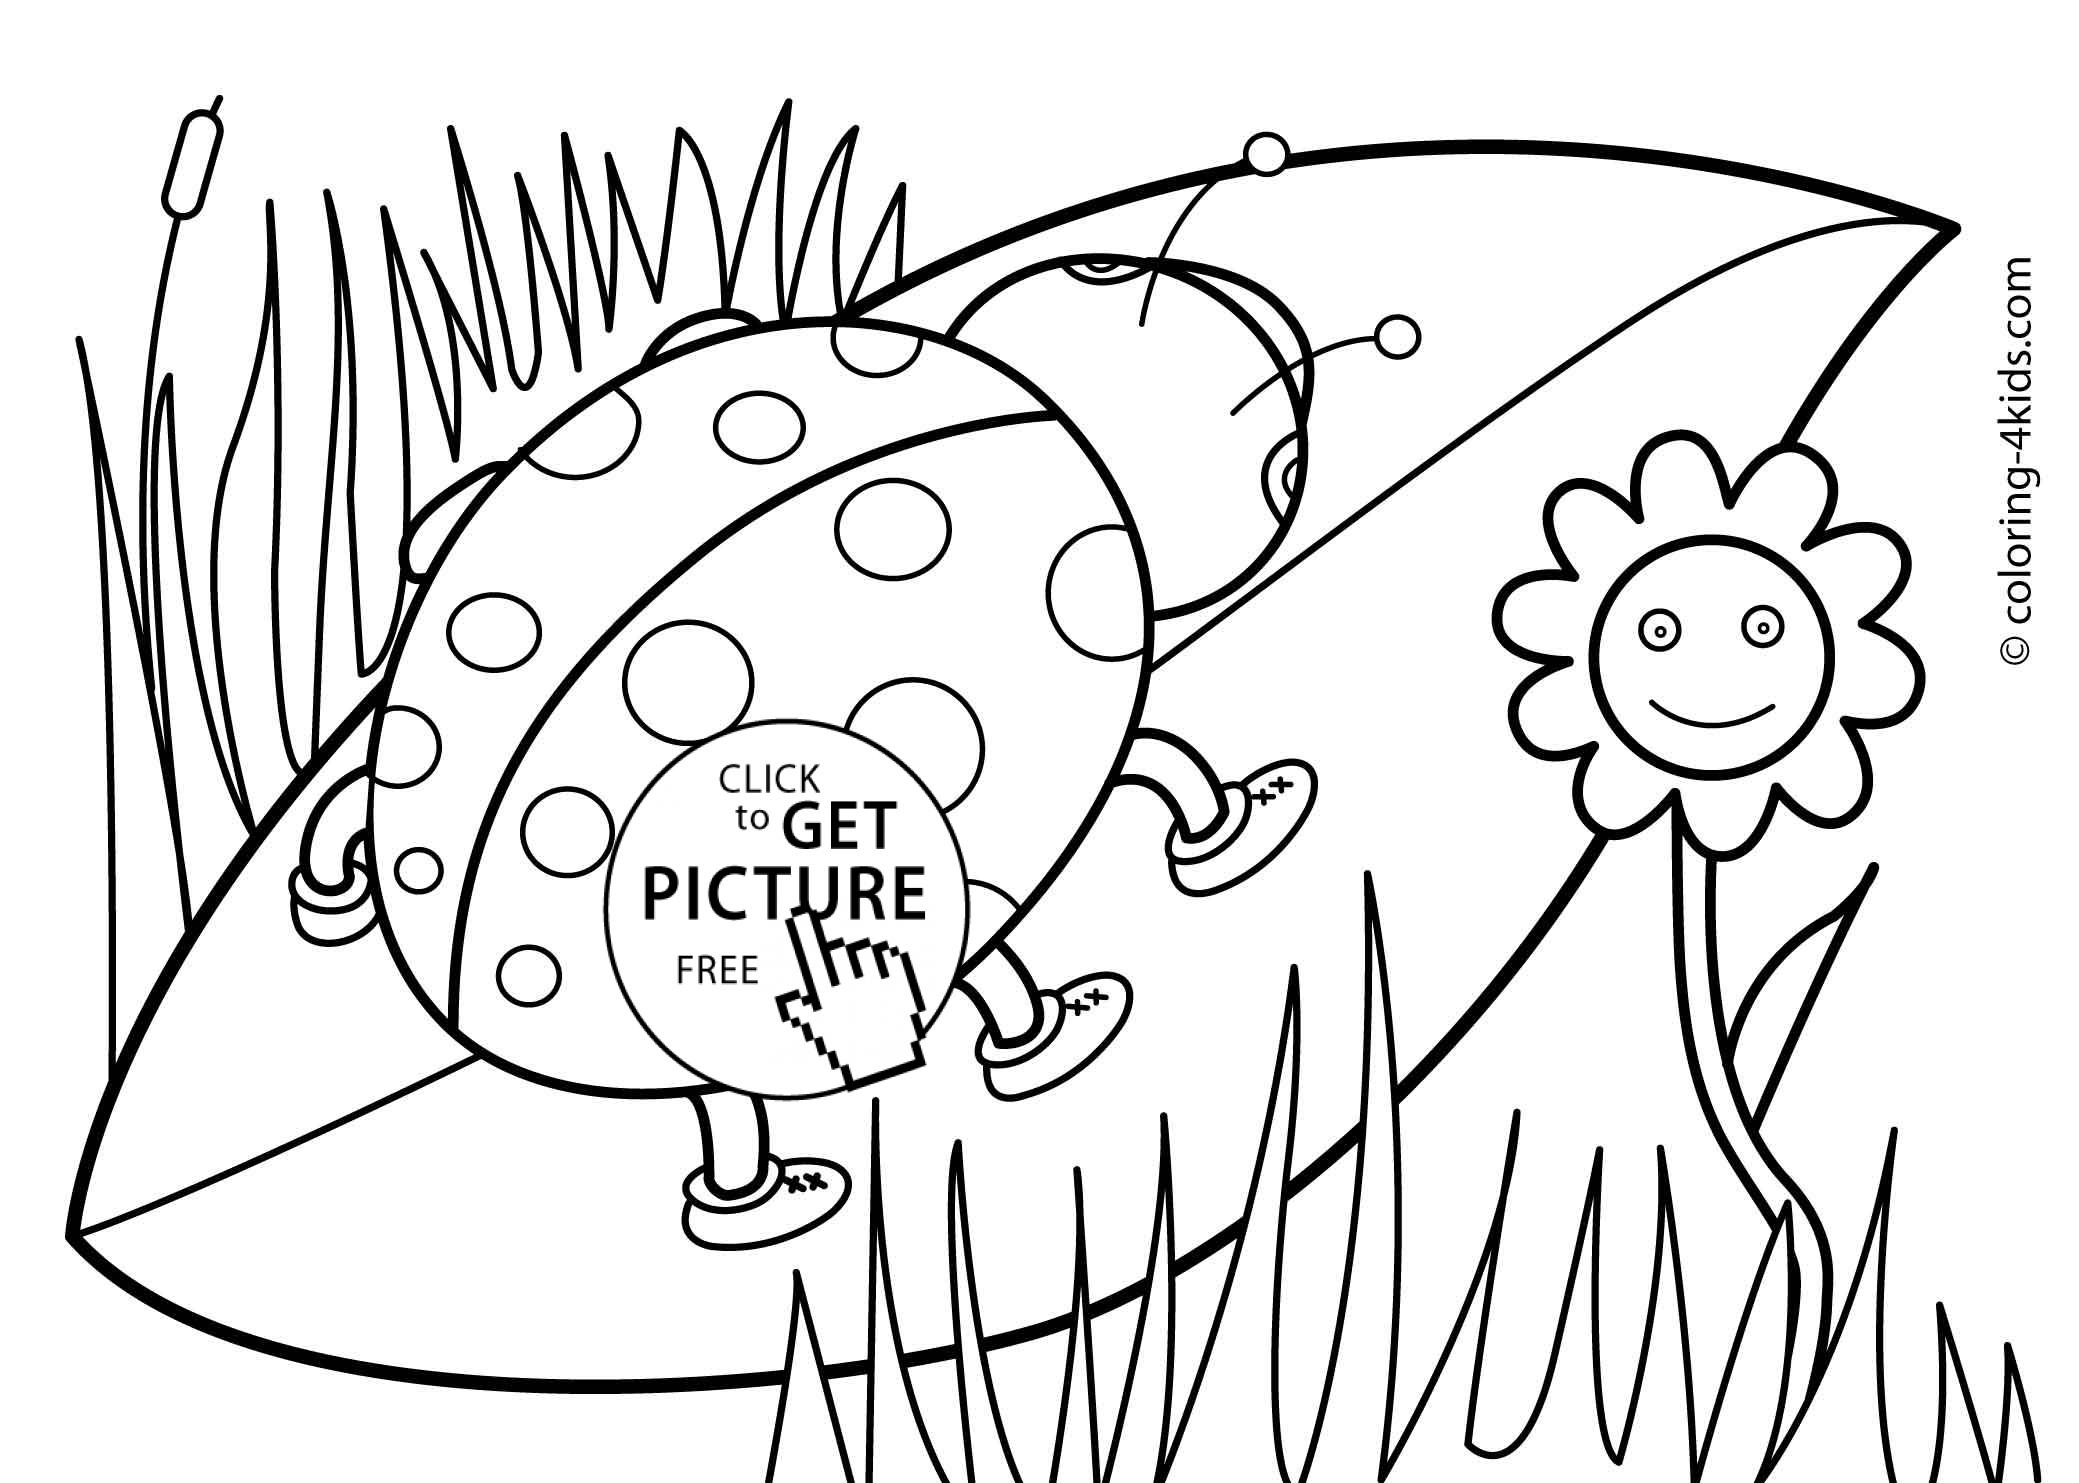 Spring Coloring Pages For Kids, Free Printable - Free Printable Spring Pictures To Color